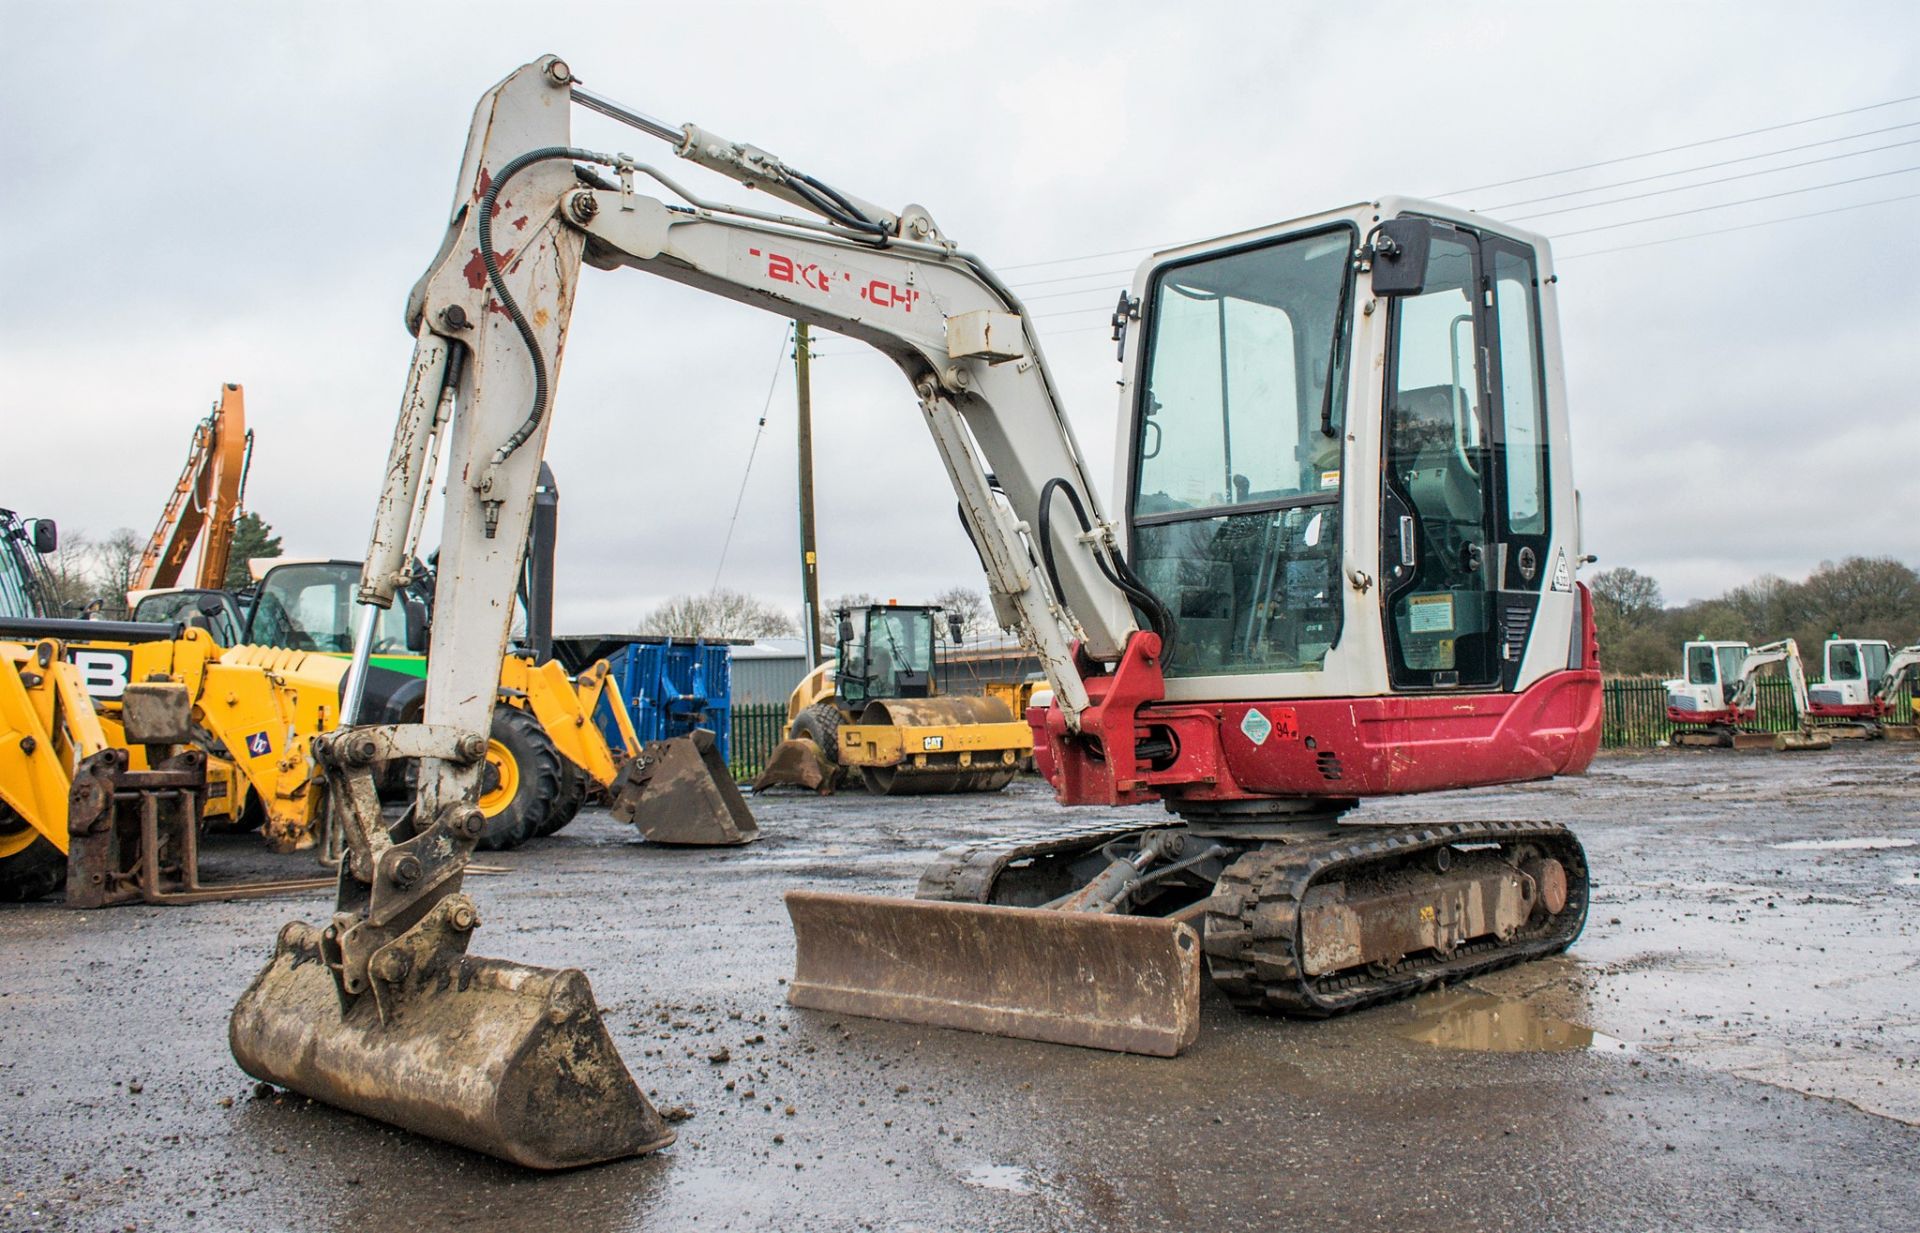 Takeuchi TB228 2.8 tonne rubber tracked excavator Year: 2014 S/N: 122803553 Recorded Hours: Not